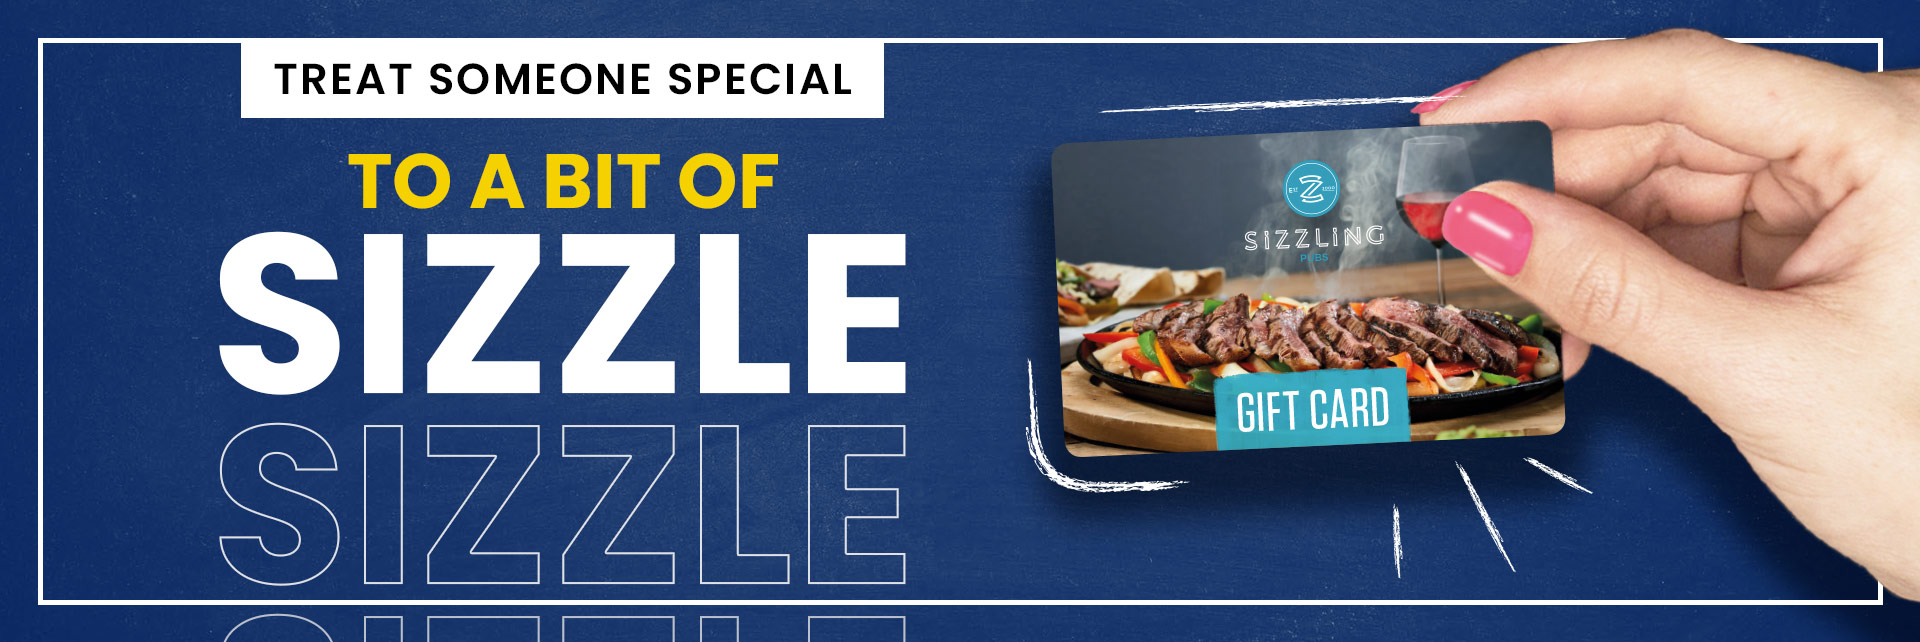 Sizzling Pubs Gift Card at Hillfoot in Liverpool